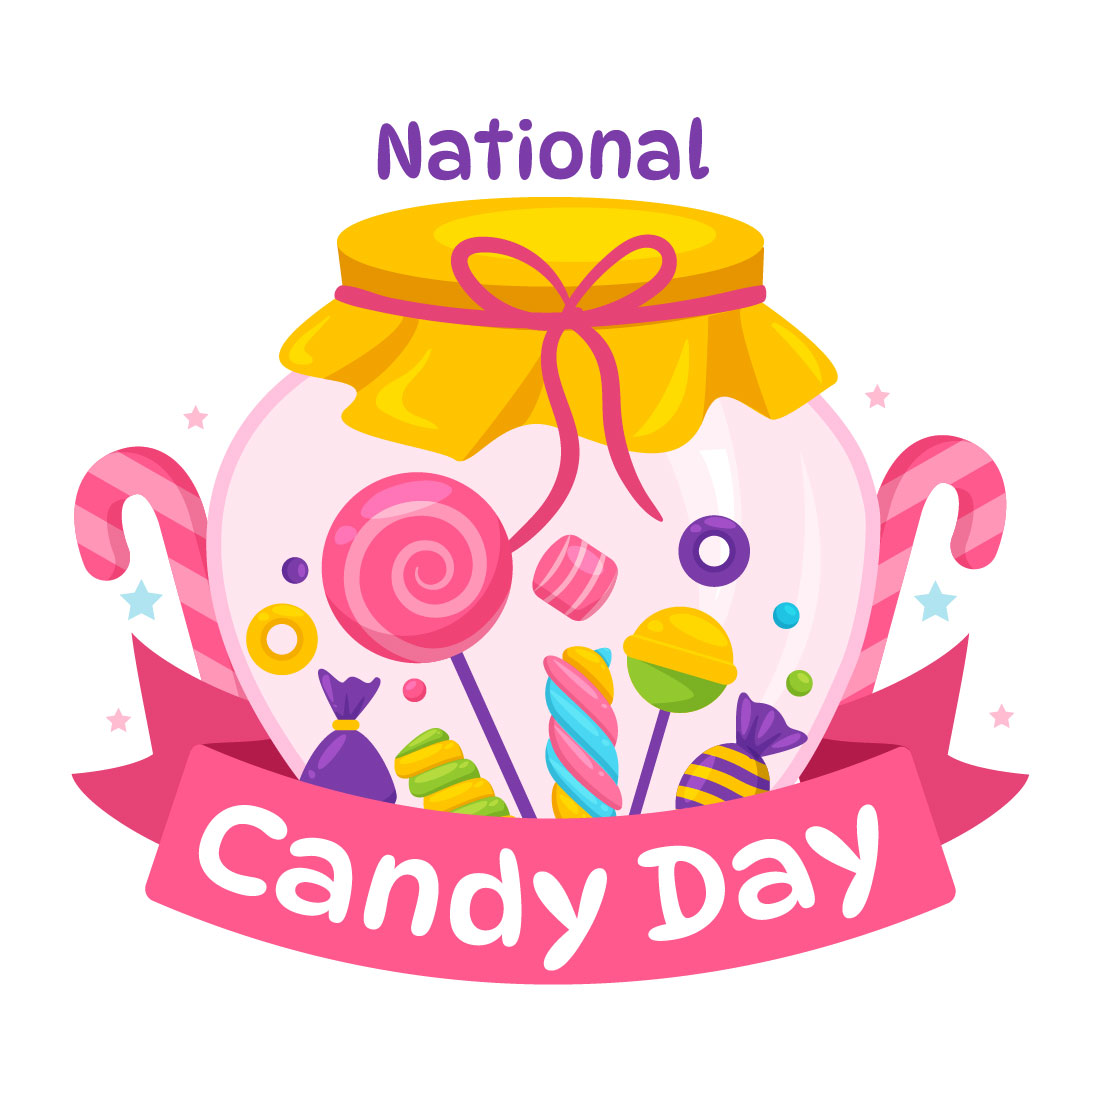 12 National Candy Day Illustration cover image.